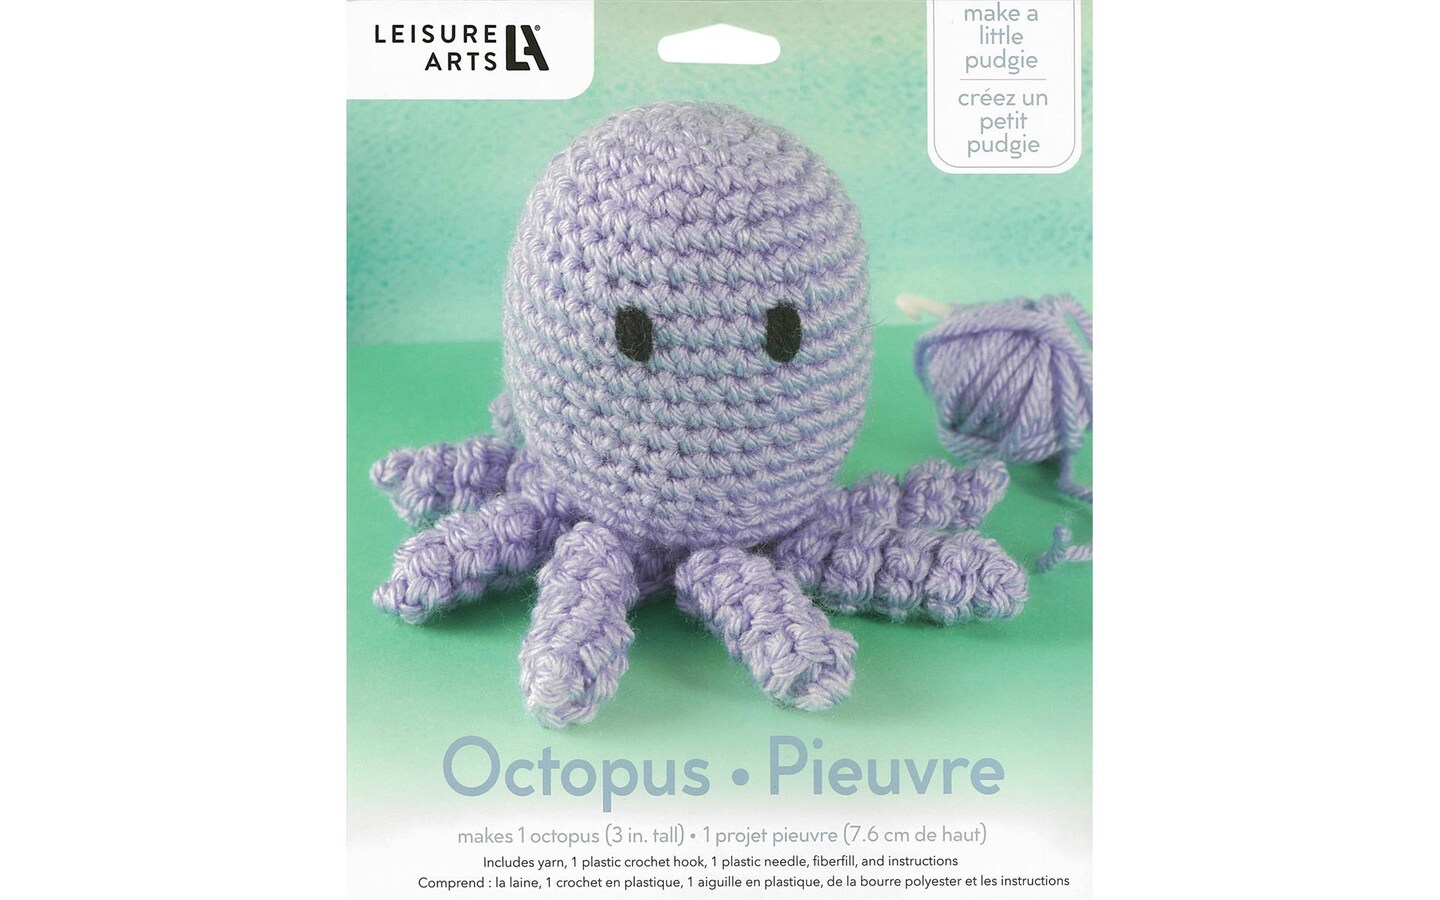 Leisure Arts Pudgies Animals Crochet Kit, Cow, 3, Complete Crochet kit,  Learn to Crochet Animal Starter kit for All Ages, Includes Instructions,  DIY